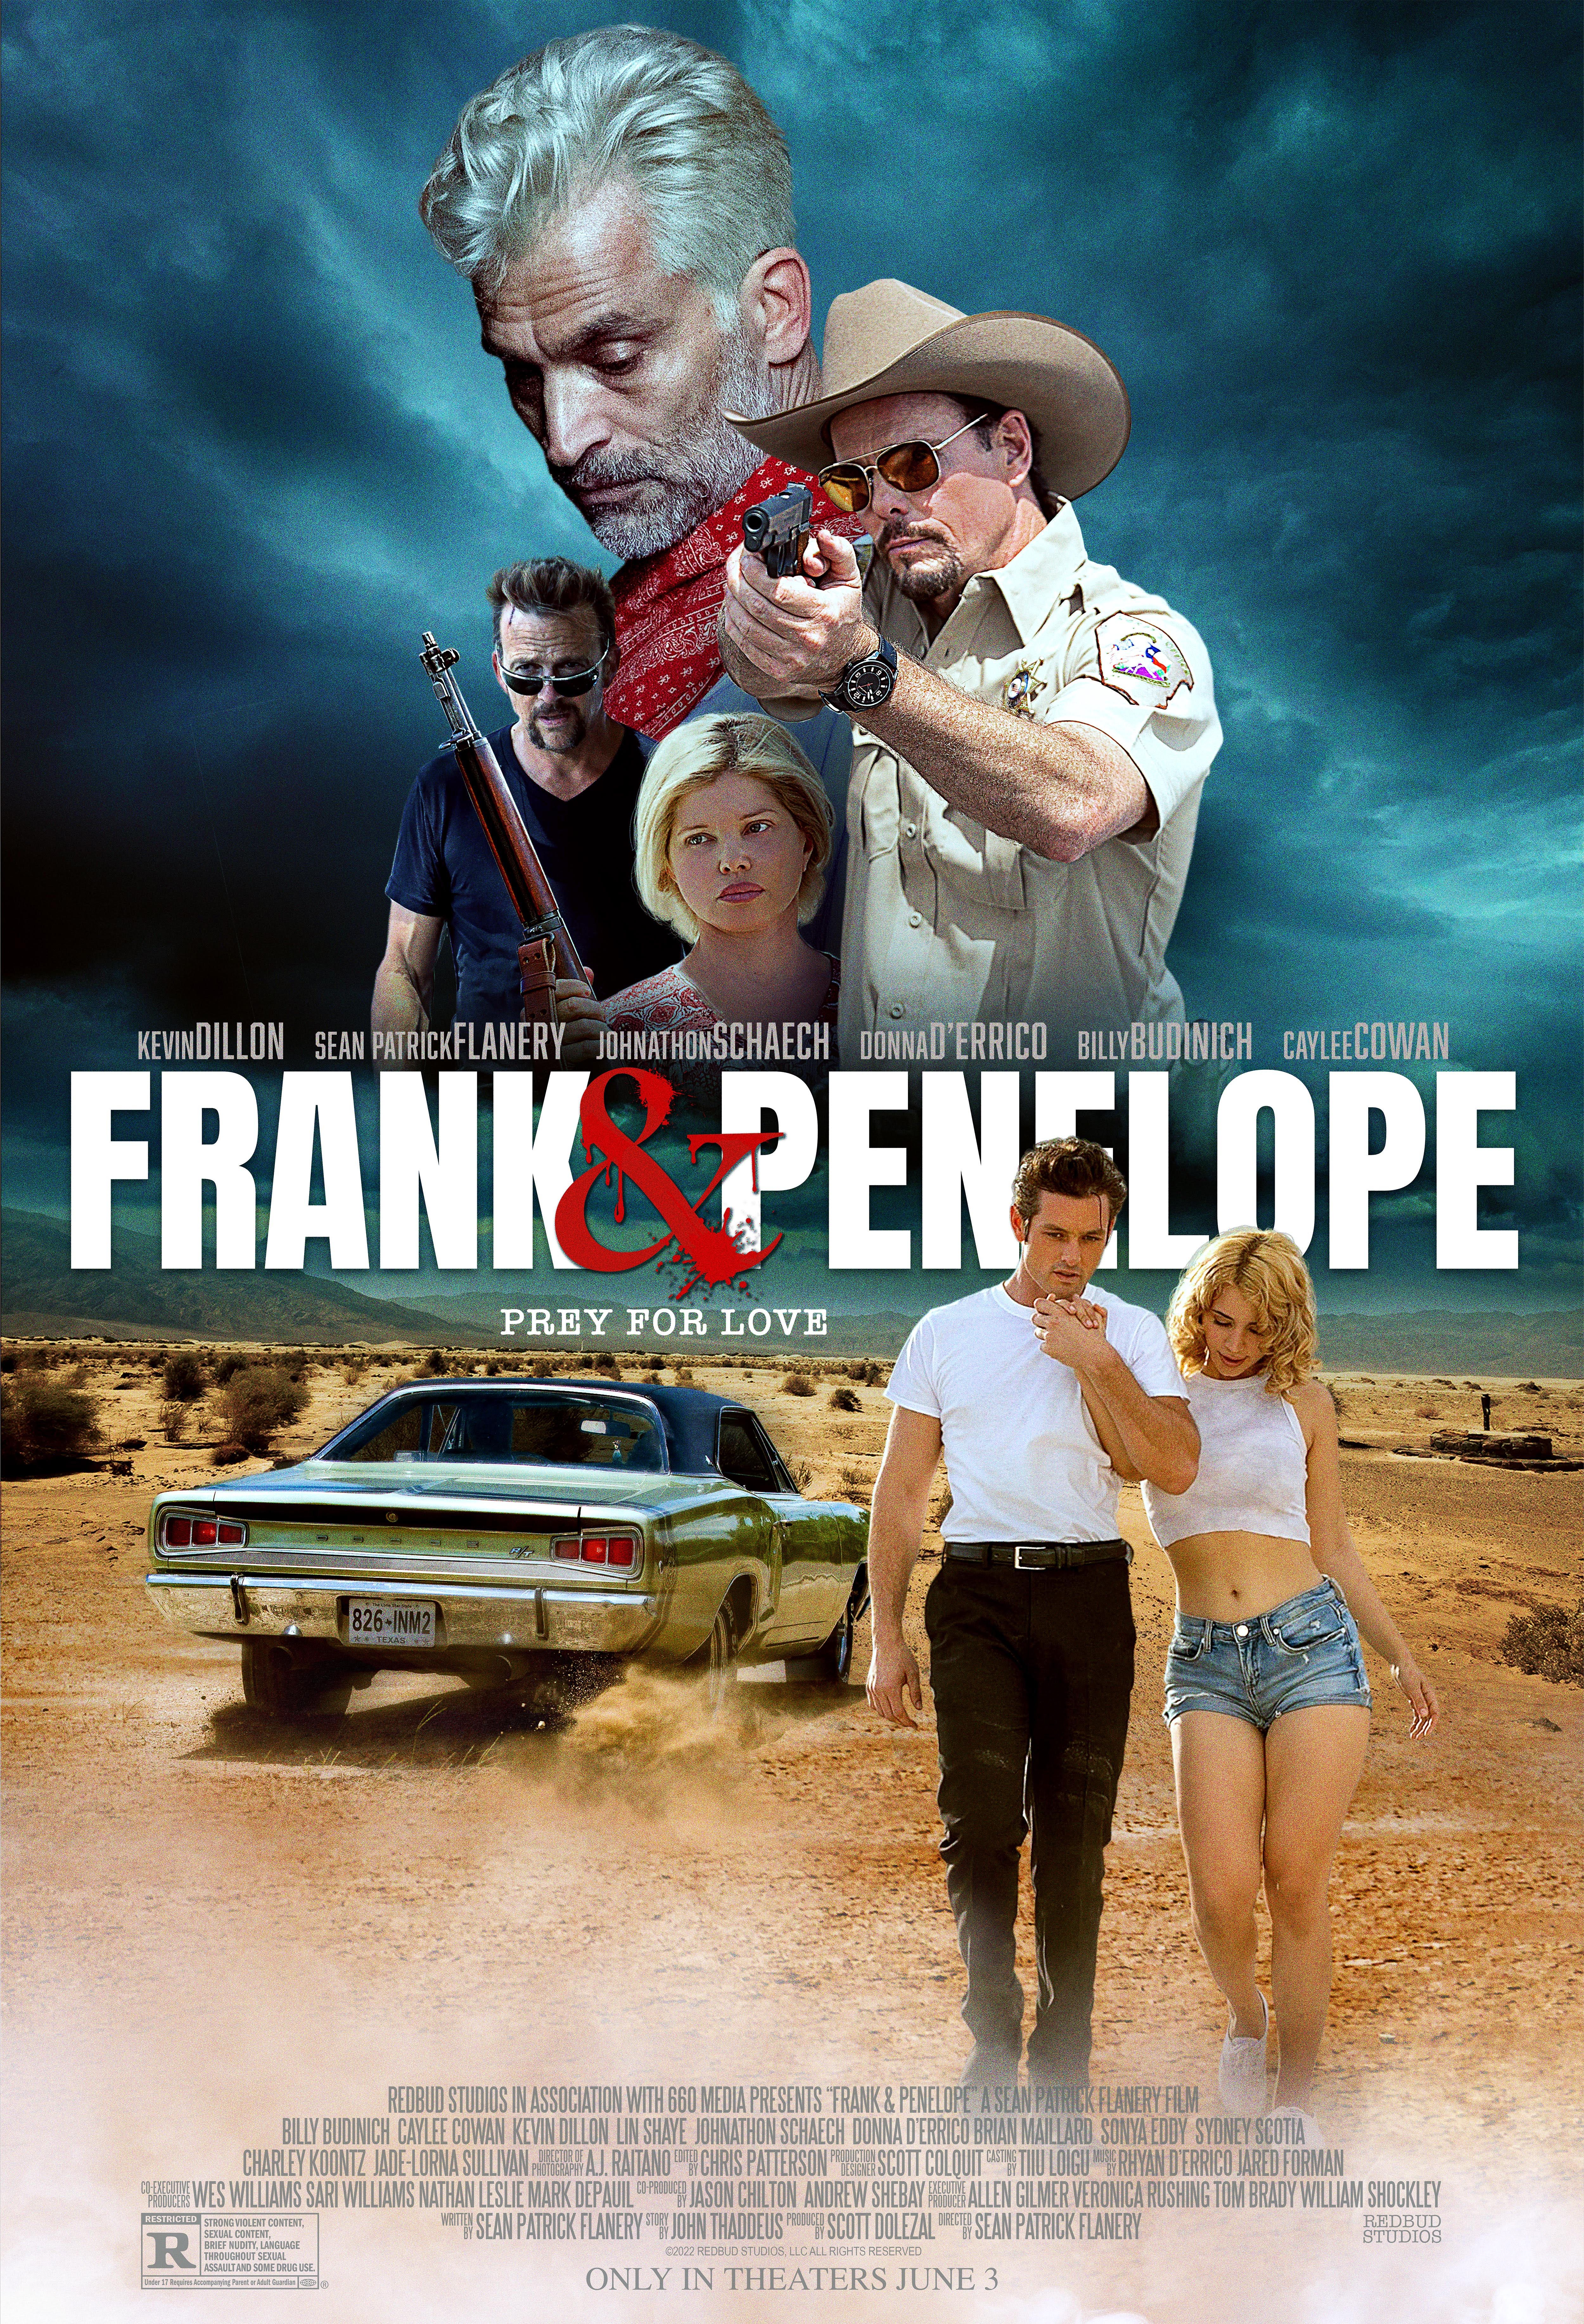 Frank & Penelope Trailer And Poster Revealed [EXCLUSIVE]